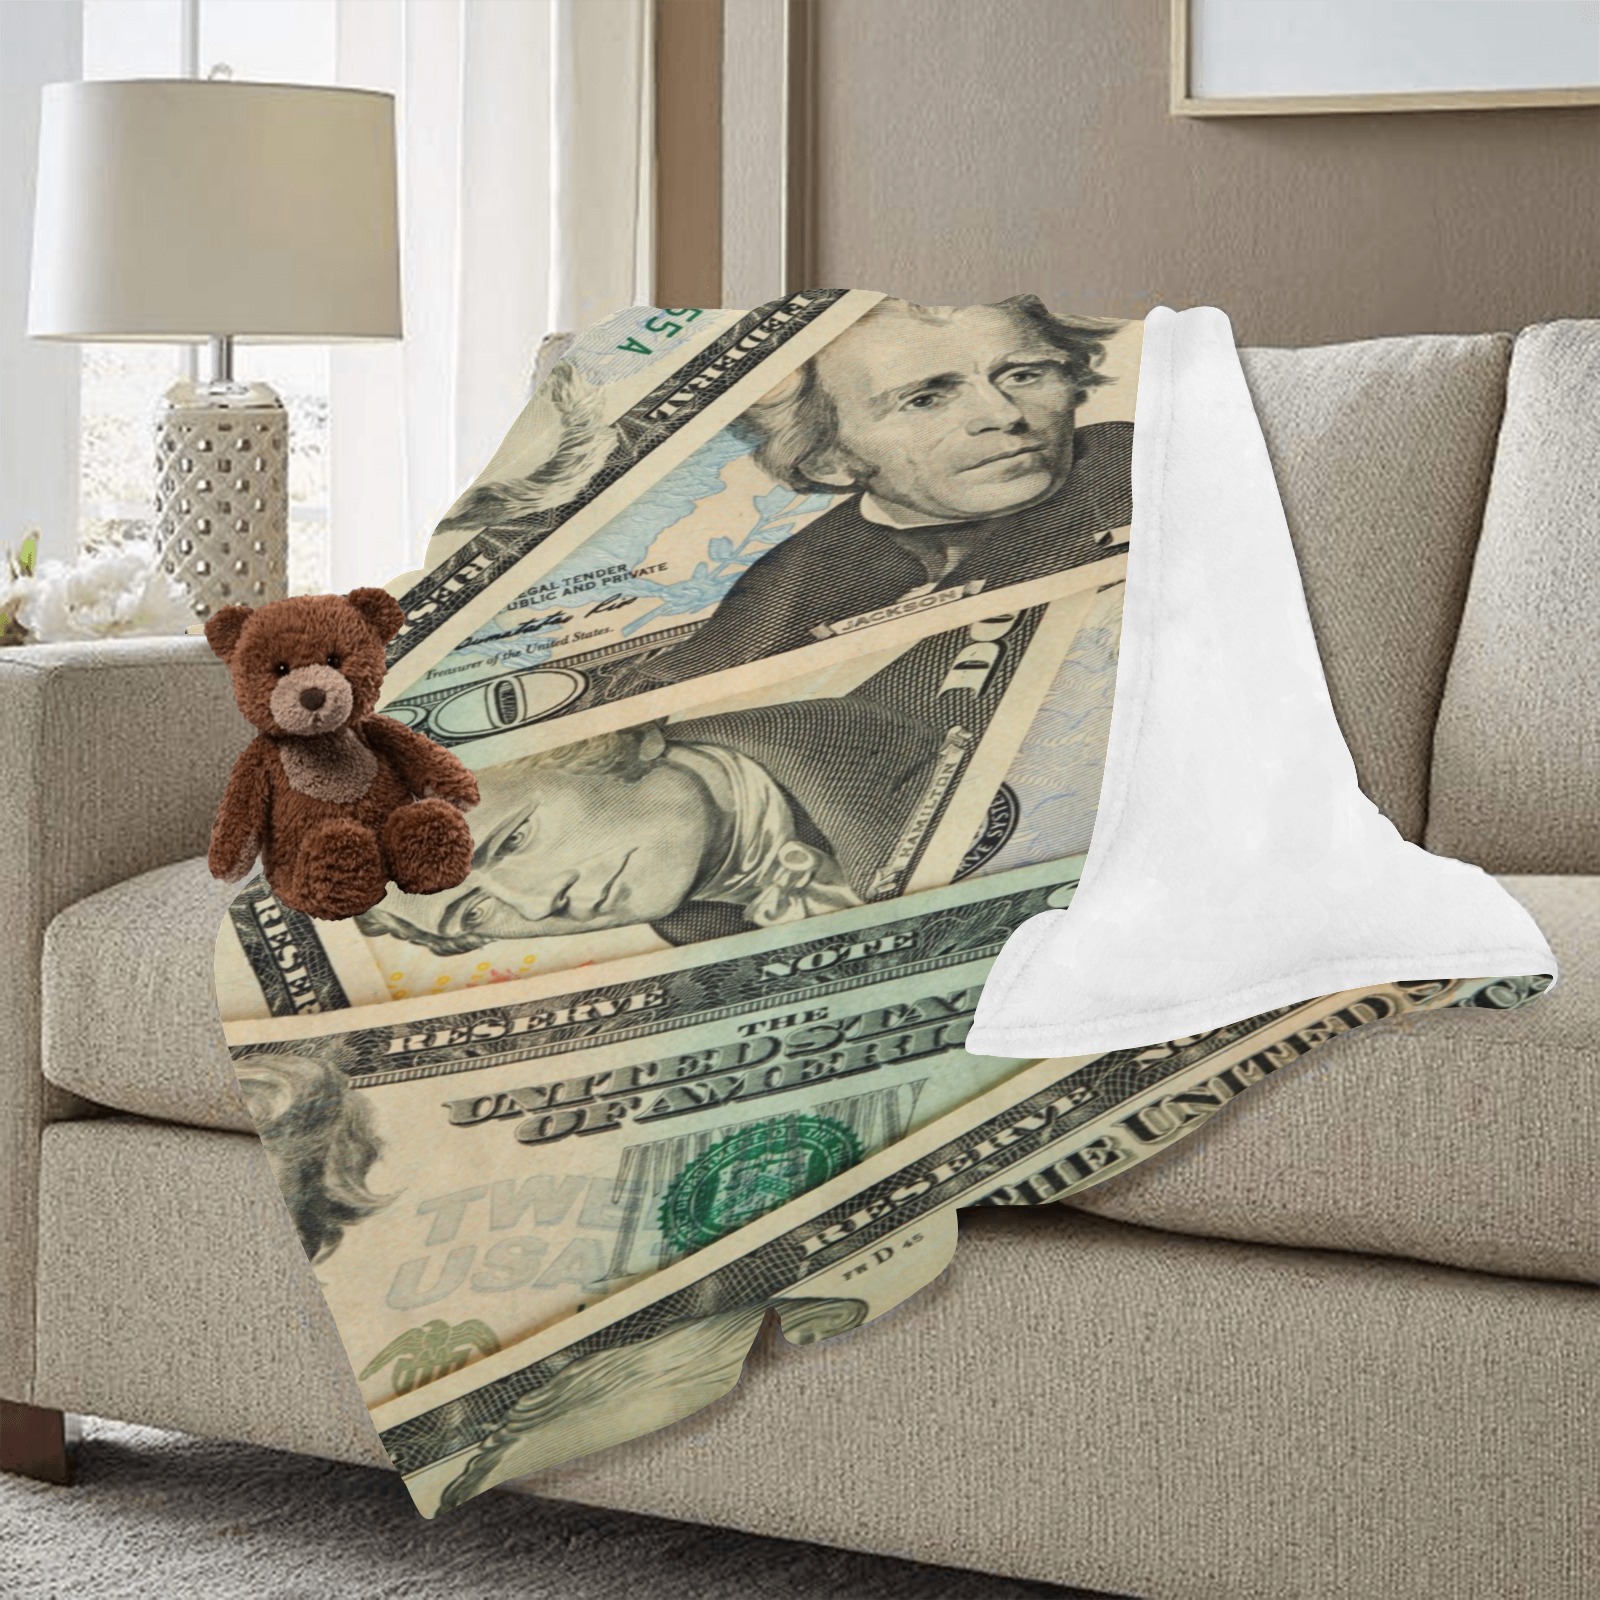 US PAPER CURRENCY Ultra-Soft Micro Fleece Blanket 40"x50" (Thick)